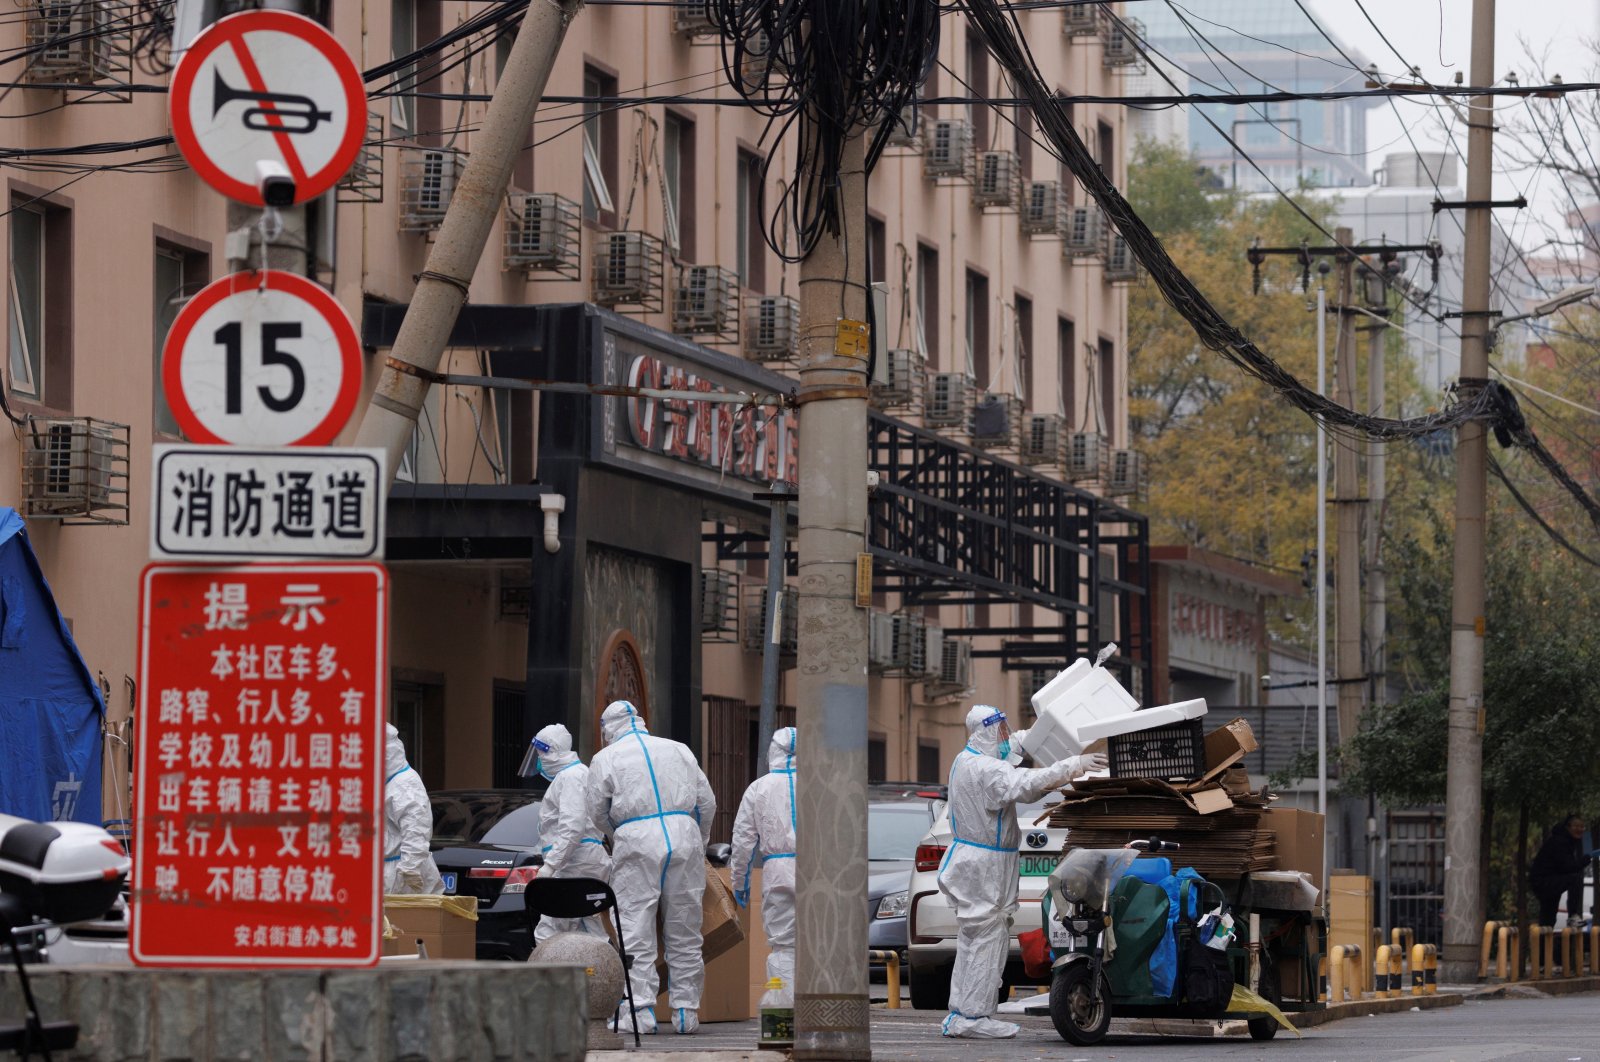 Pandemic prevention workers in protective suits collect trash in a locked-down residential compound as outbreaks of COVID-19 continue in Beijing, China, Nov. 18, 2022. (Reuters Photo)